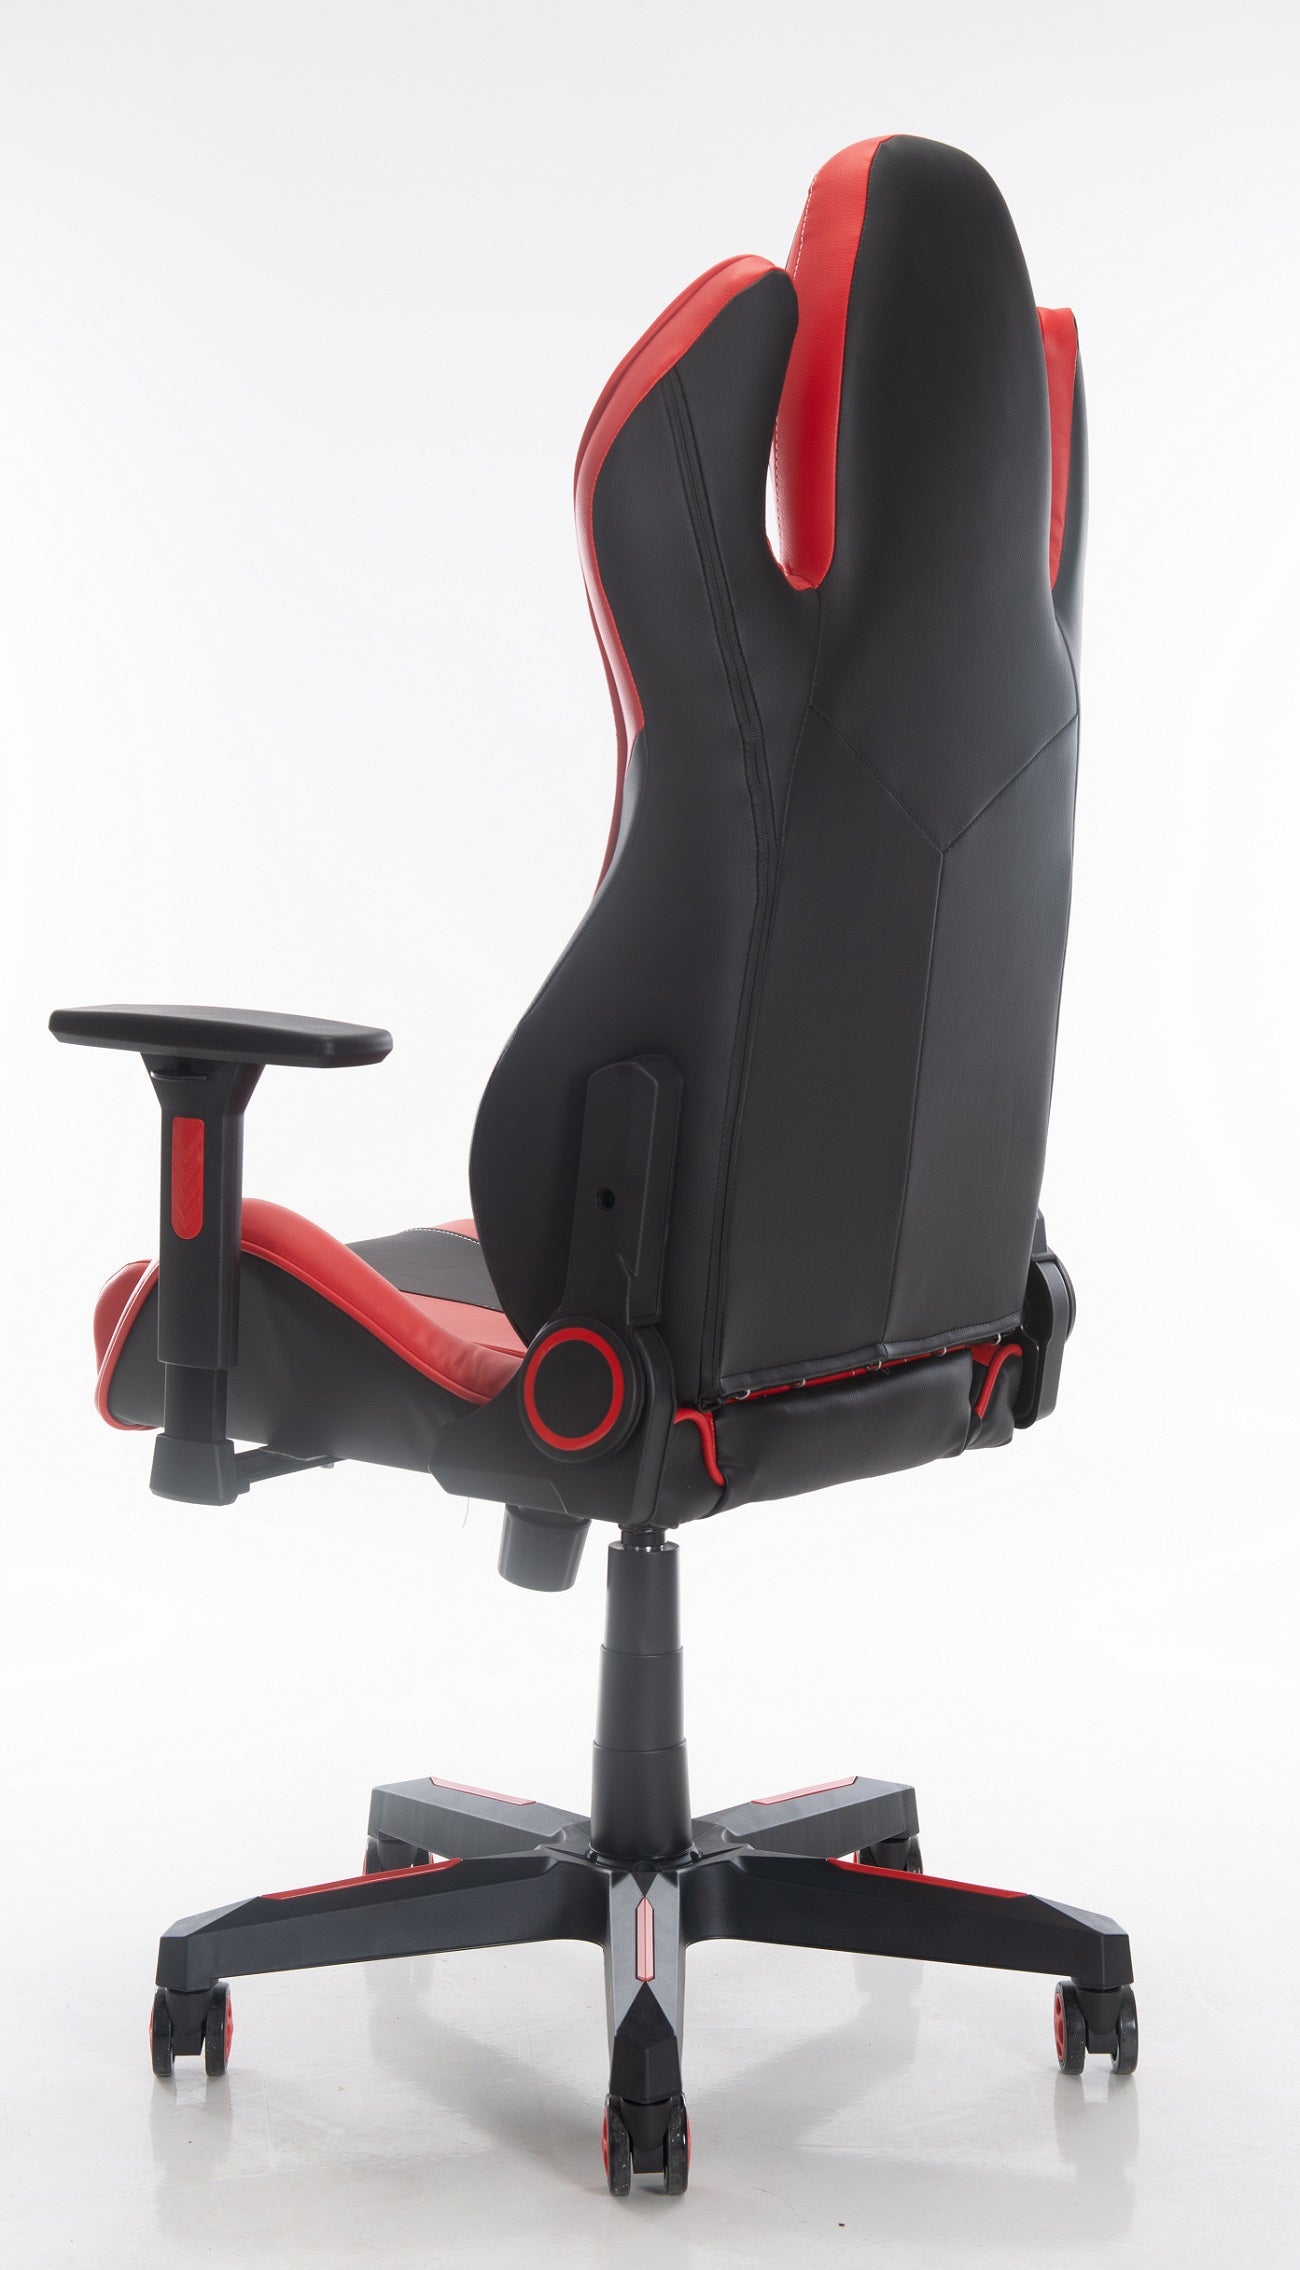 ViscoLogic Cayenne M6 Ergonomic High-Back, 2D Armrest, Reclining Sports Styled Home Office Swivel PC Racing Gaming Chair (Black & Red)